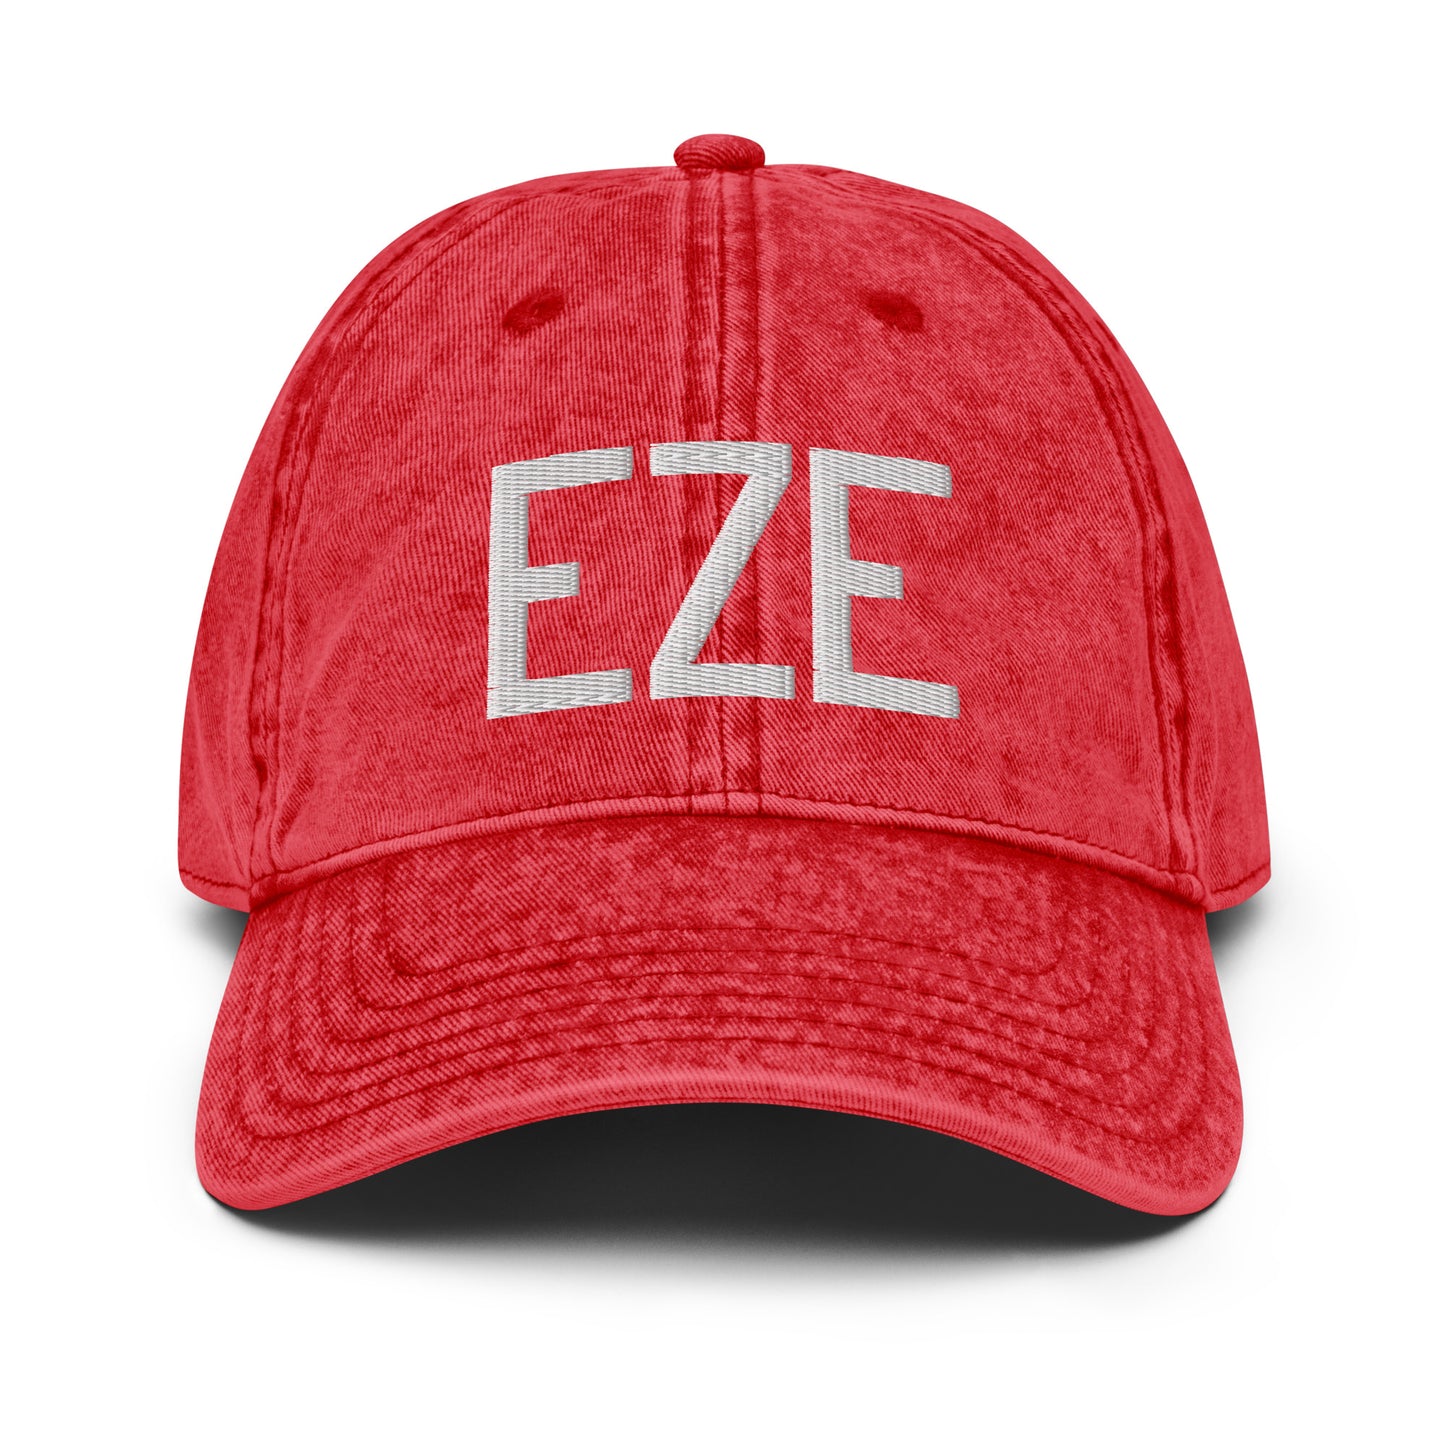 Airport Code Twill Cap - White • EZE Buenos Aires • YHM Designs - Image 22